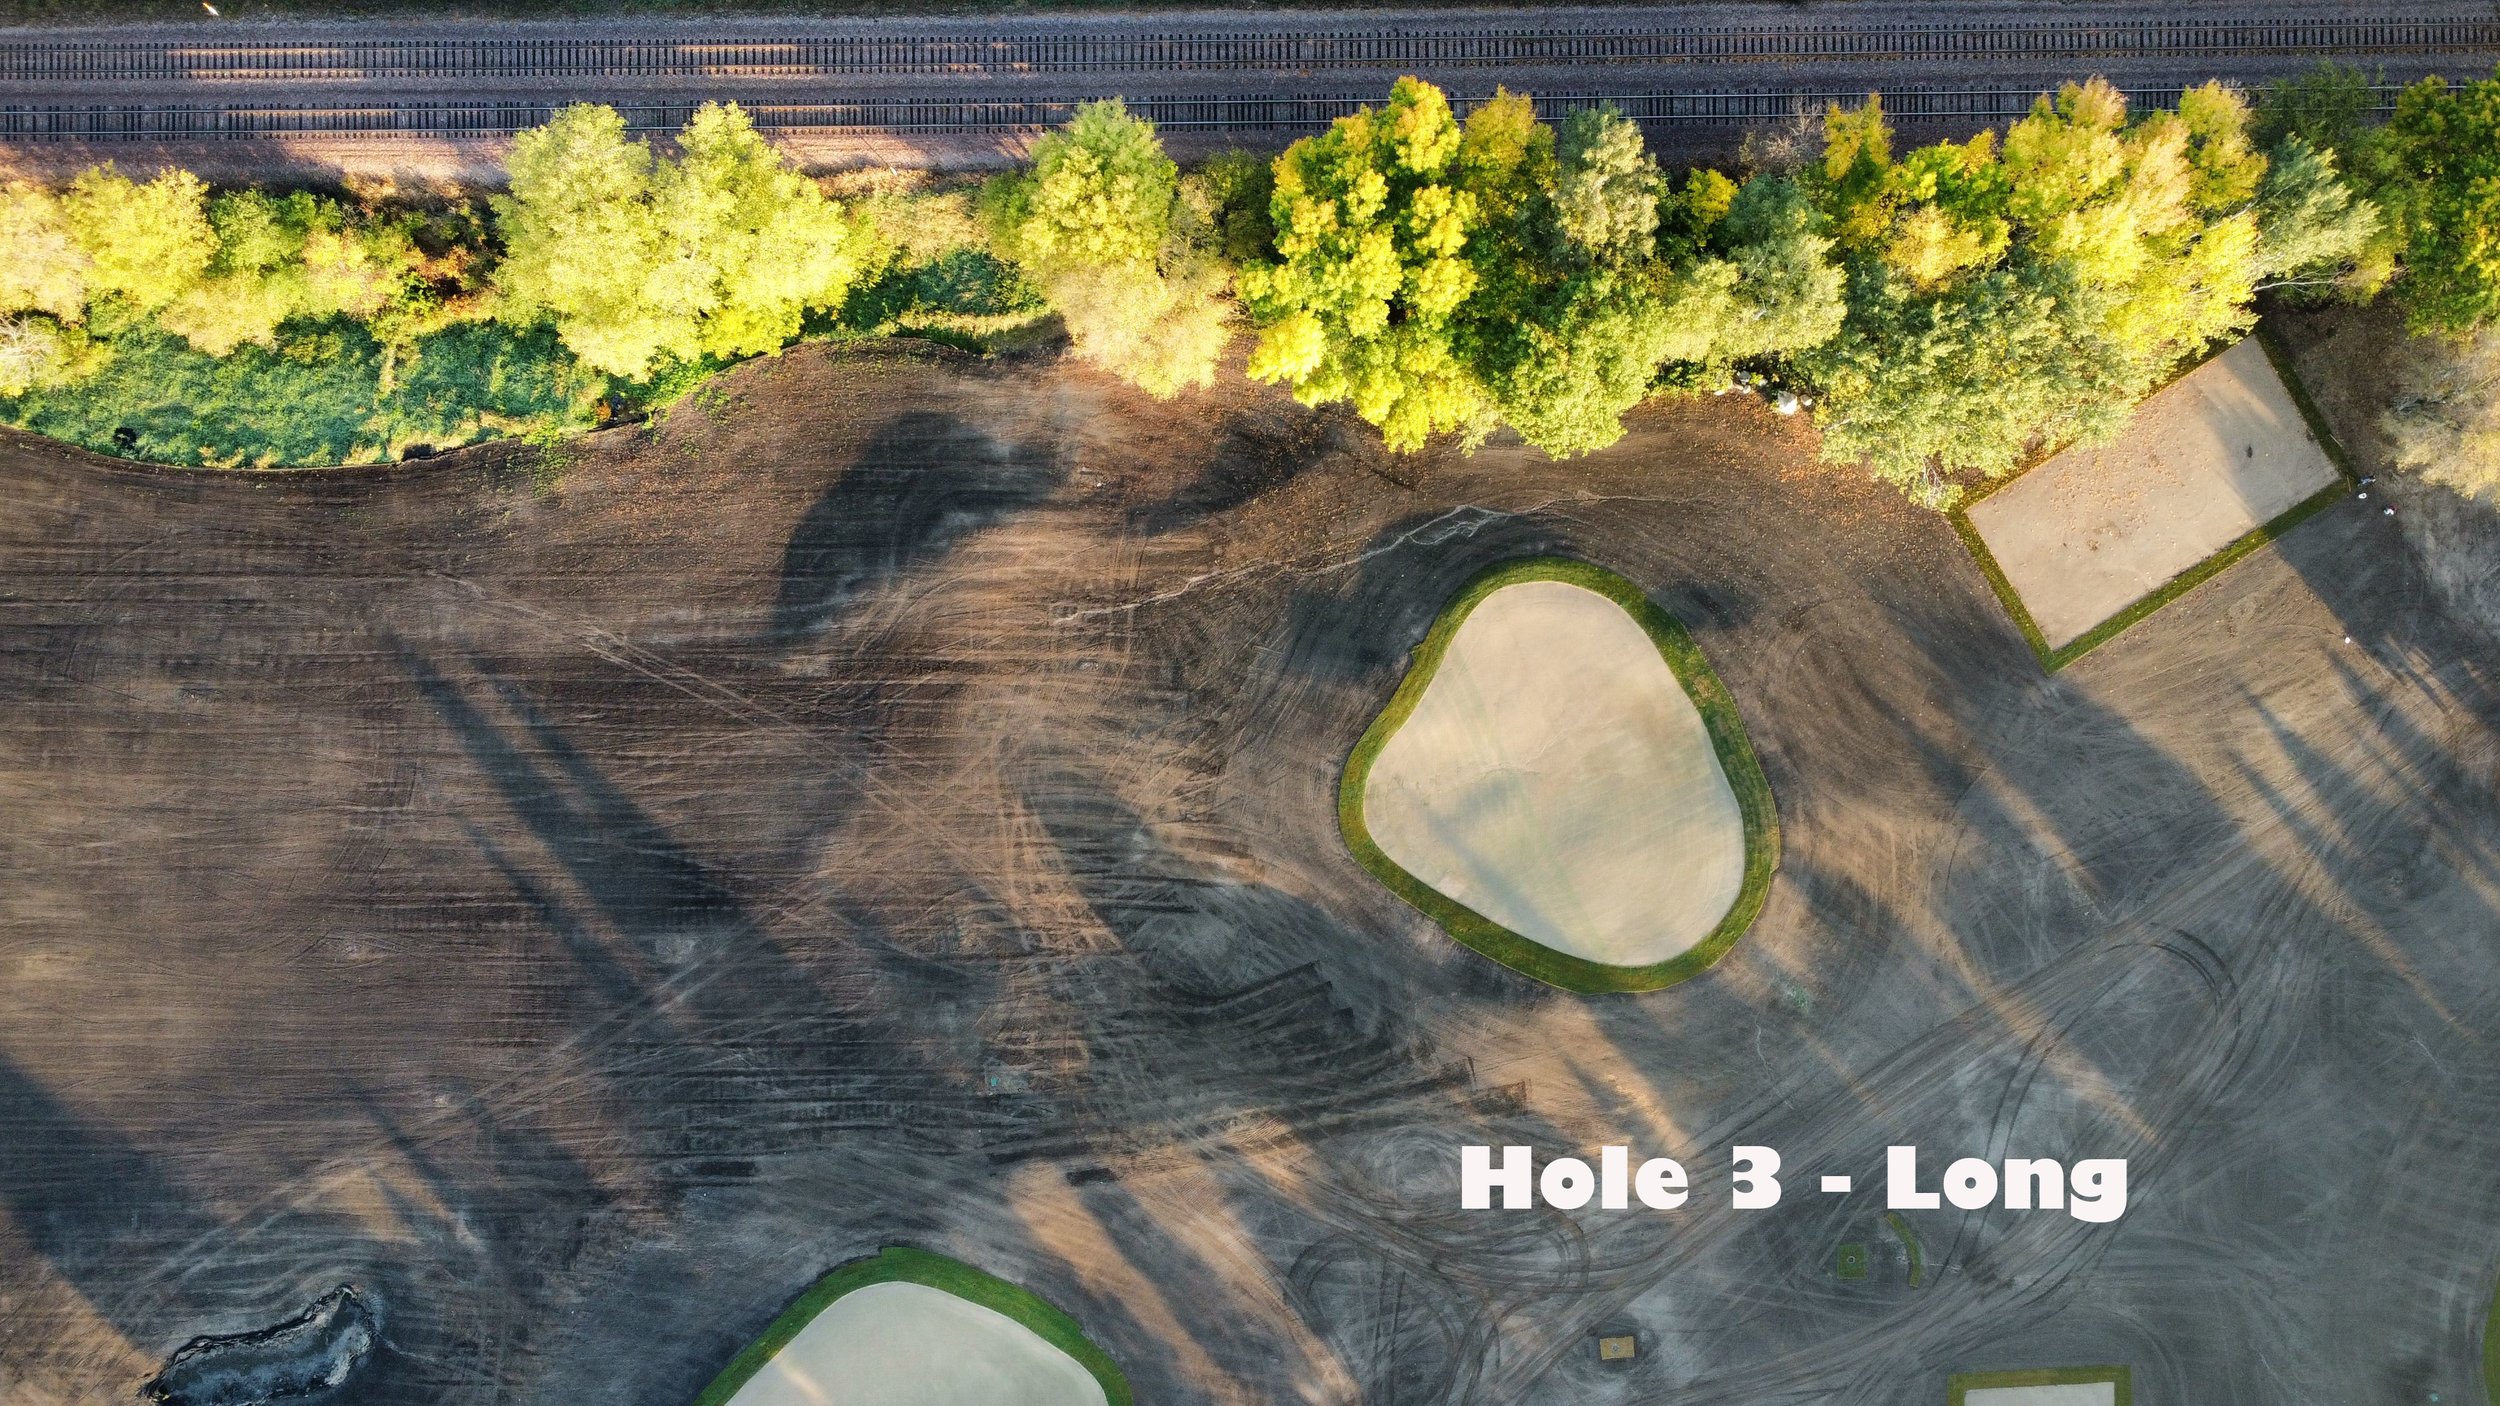  #3 Long - 363 | 317 | 219 Yards Green Shaped by Dan Bieganek  For golfers of different ages and abilities our ‘Long’ hole will range from a drive and pitch to a full three-shotter.   The orientation of the green rewards an approach from the left of 